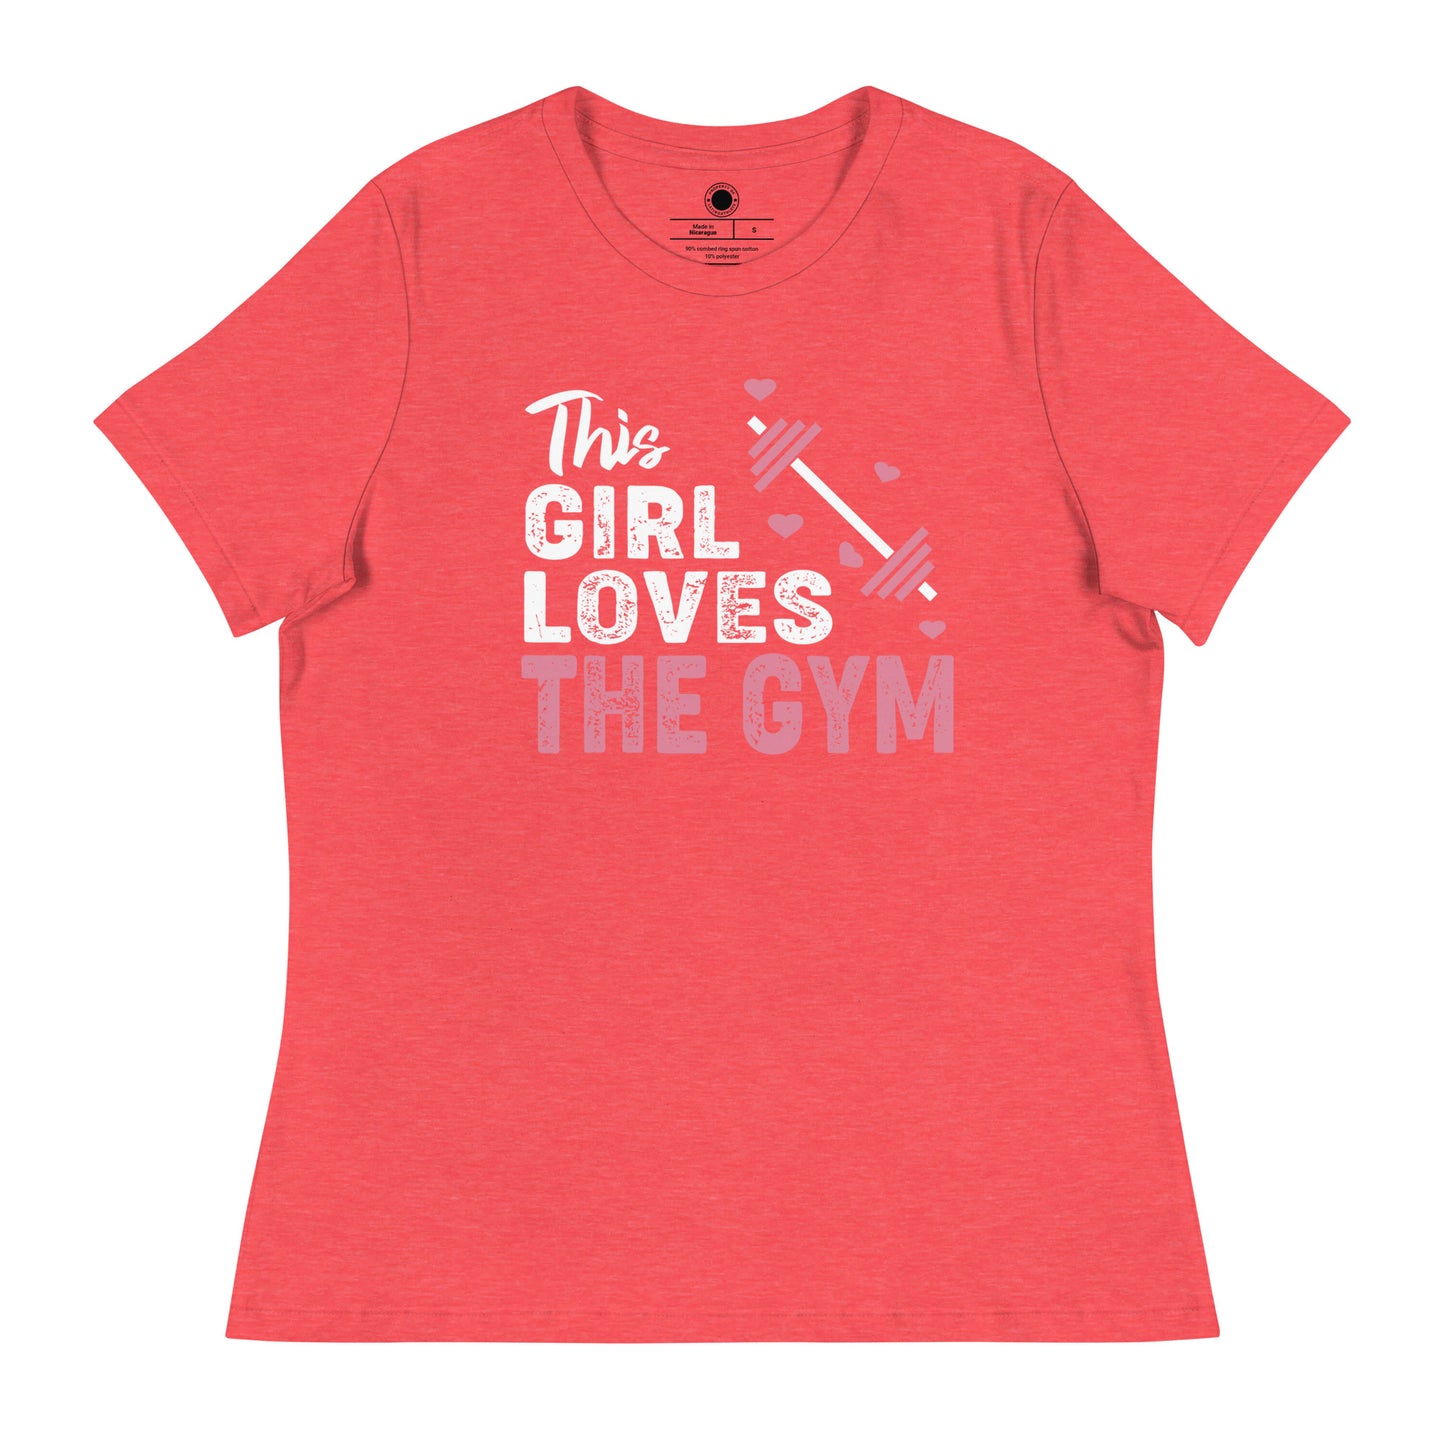 Loves Gym Women's Relaxed T-Shirt